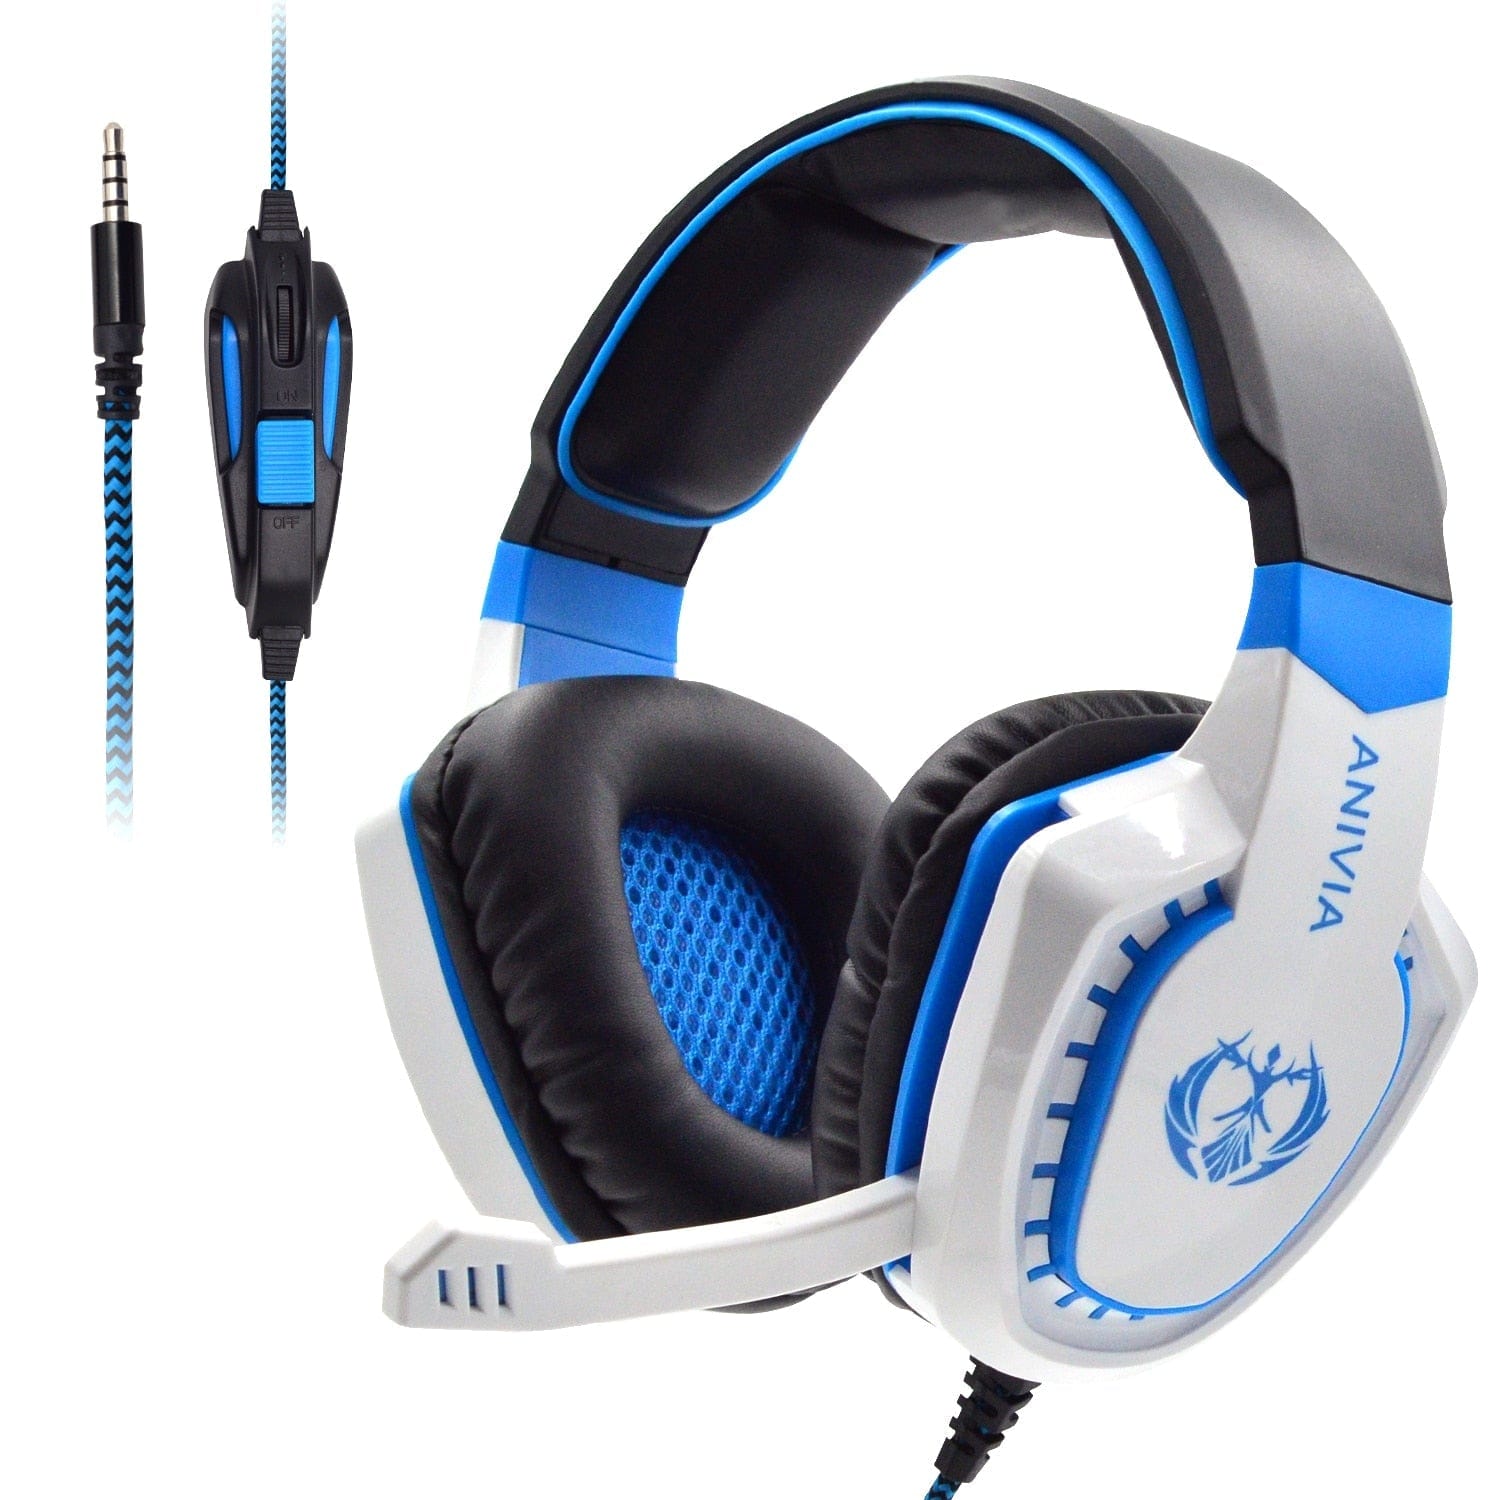 ÆLECTRONIX White & Blue Gaming Headset